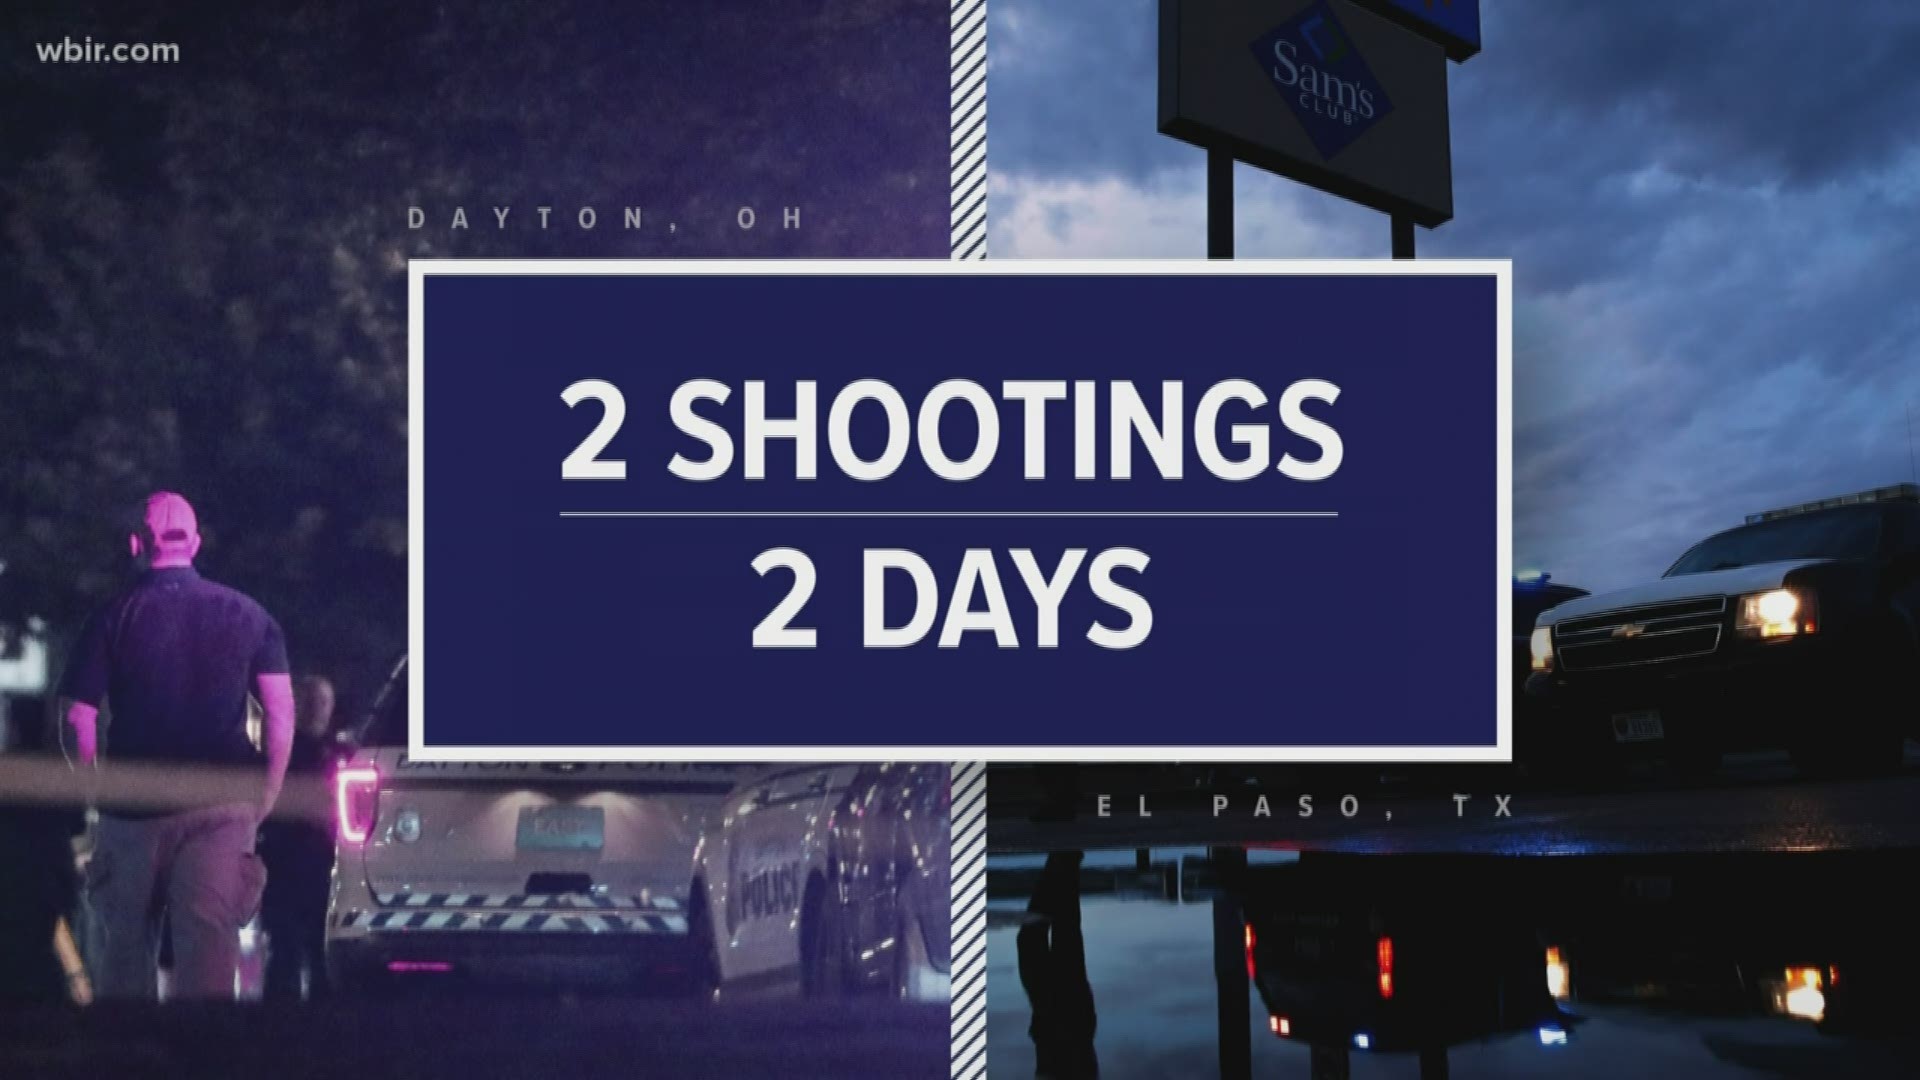 A total of 29 people are dead and more than 50 are hurt from the shootings. In El Paso, Texas on Saturday, a gunman walked into a Walmart and opened fire- killing 20. Then early Sunday morning in Dayton, Ohio- another gunman killed 9 people outside a bar.